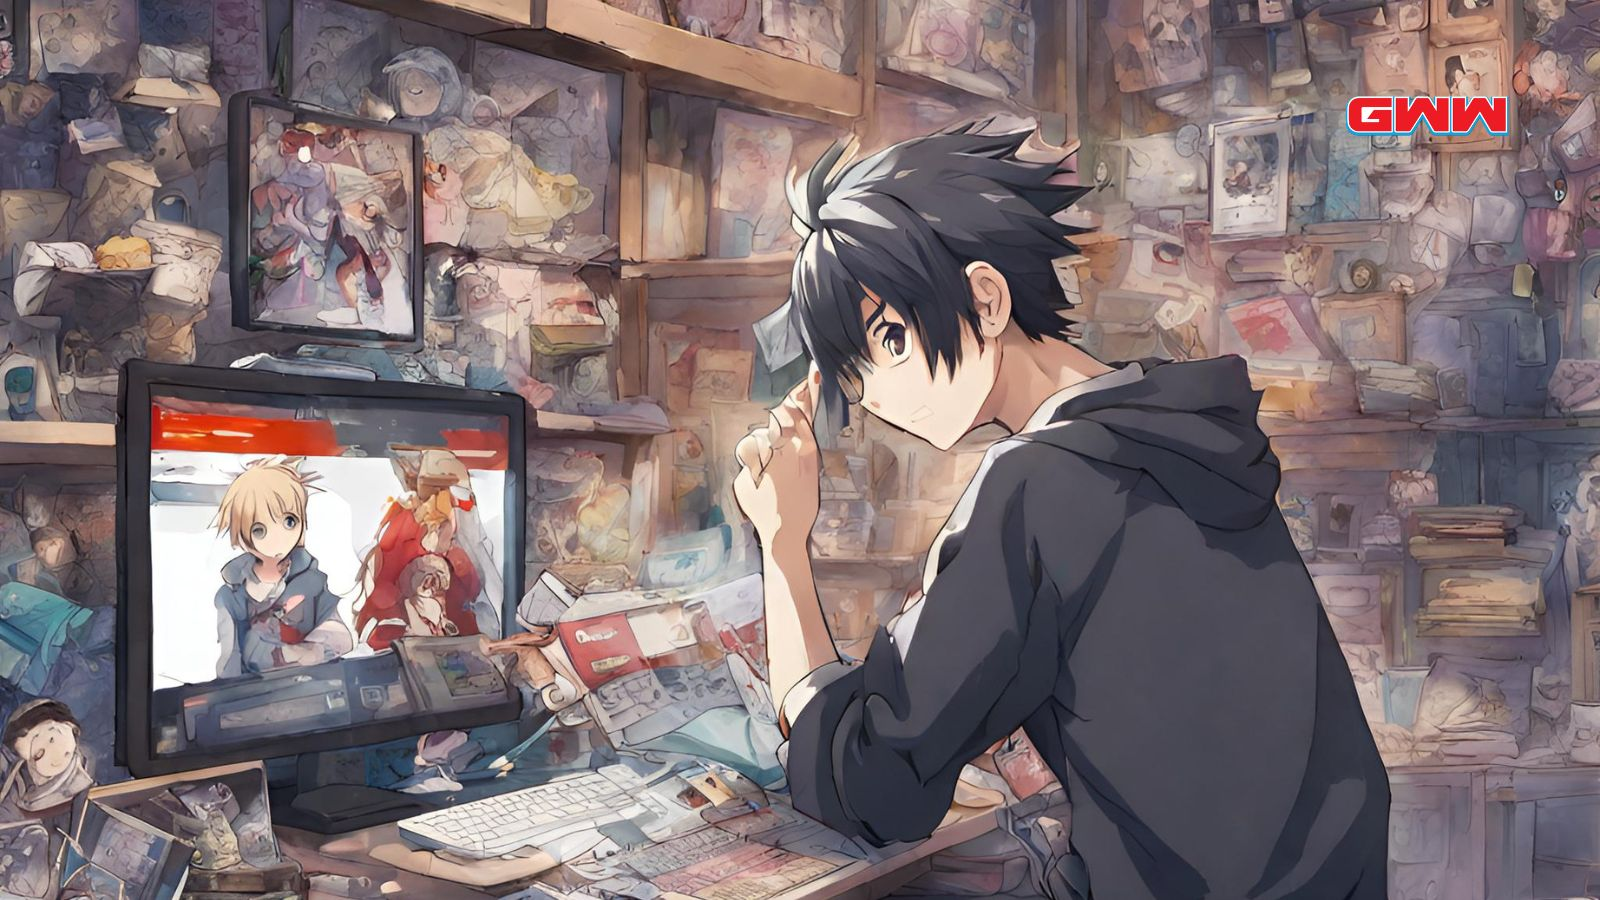 Artist drawing anime at a desk cluttered with manga and figures